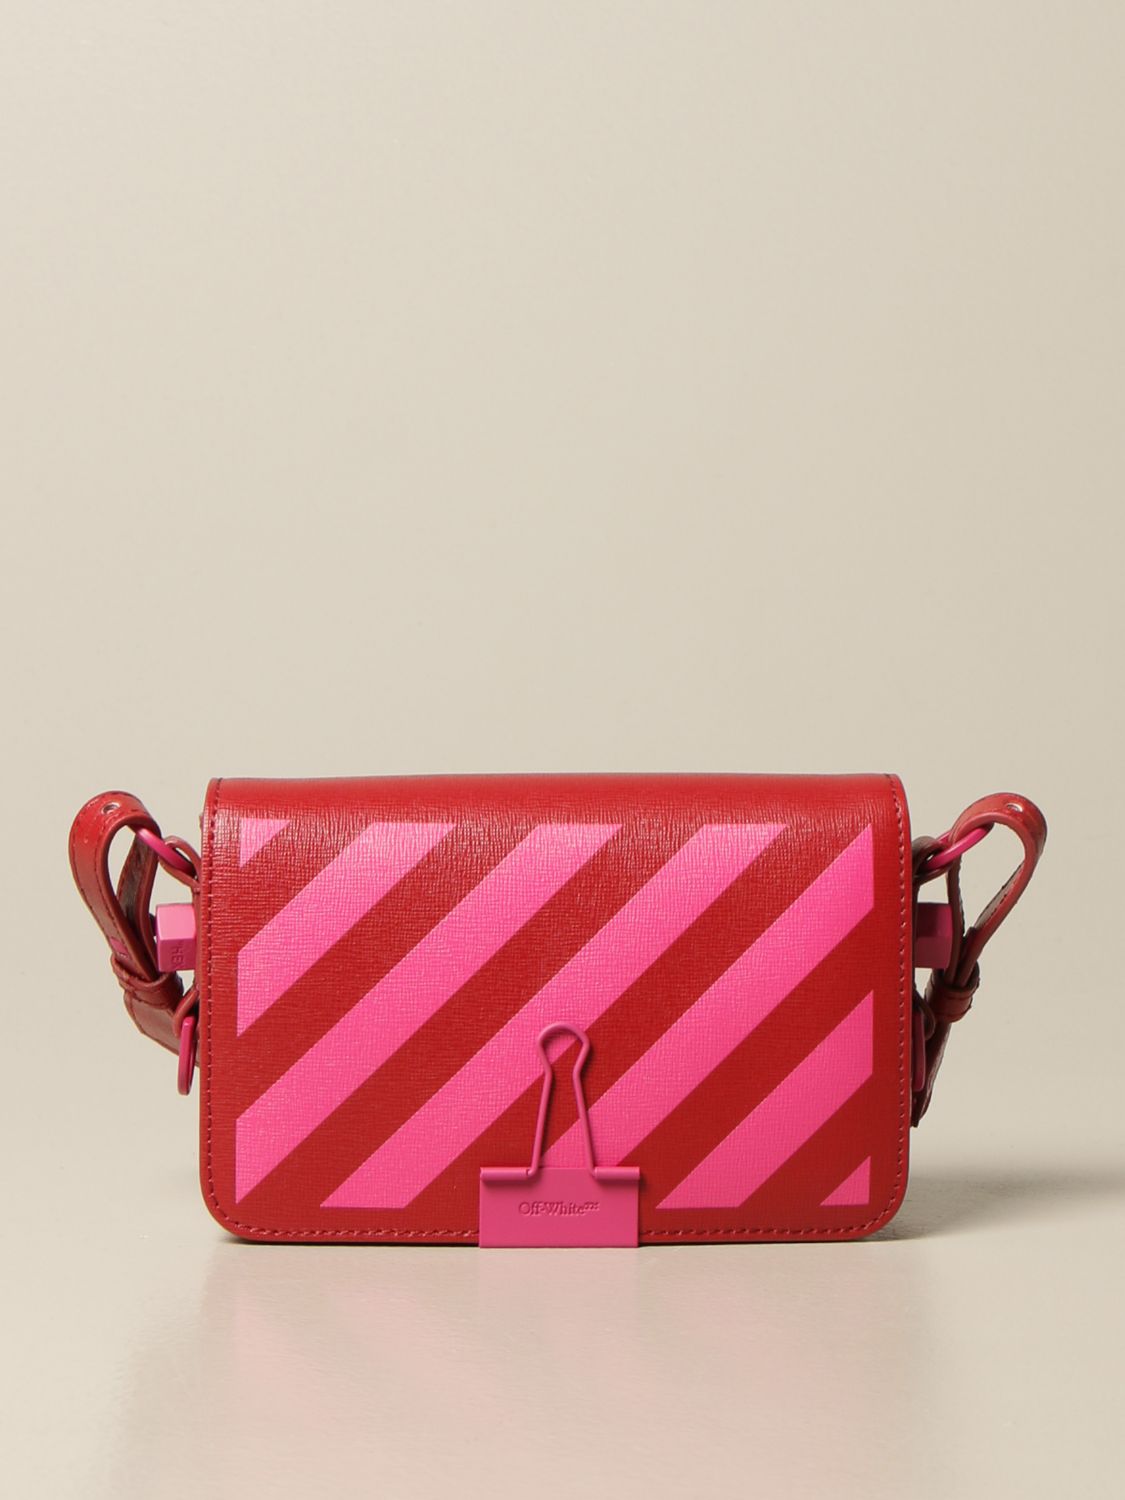 Off White crossbody bag in saffiano leather with diagonal print